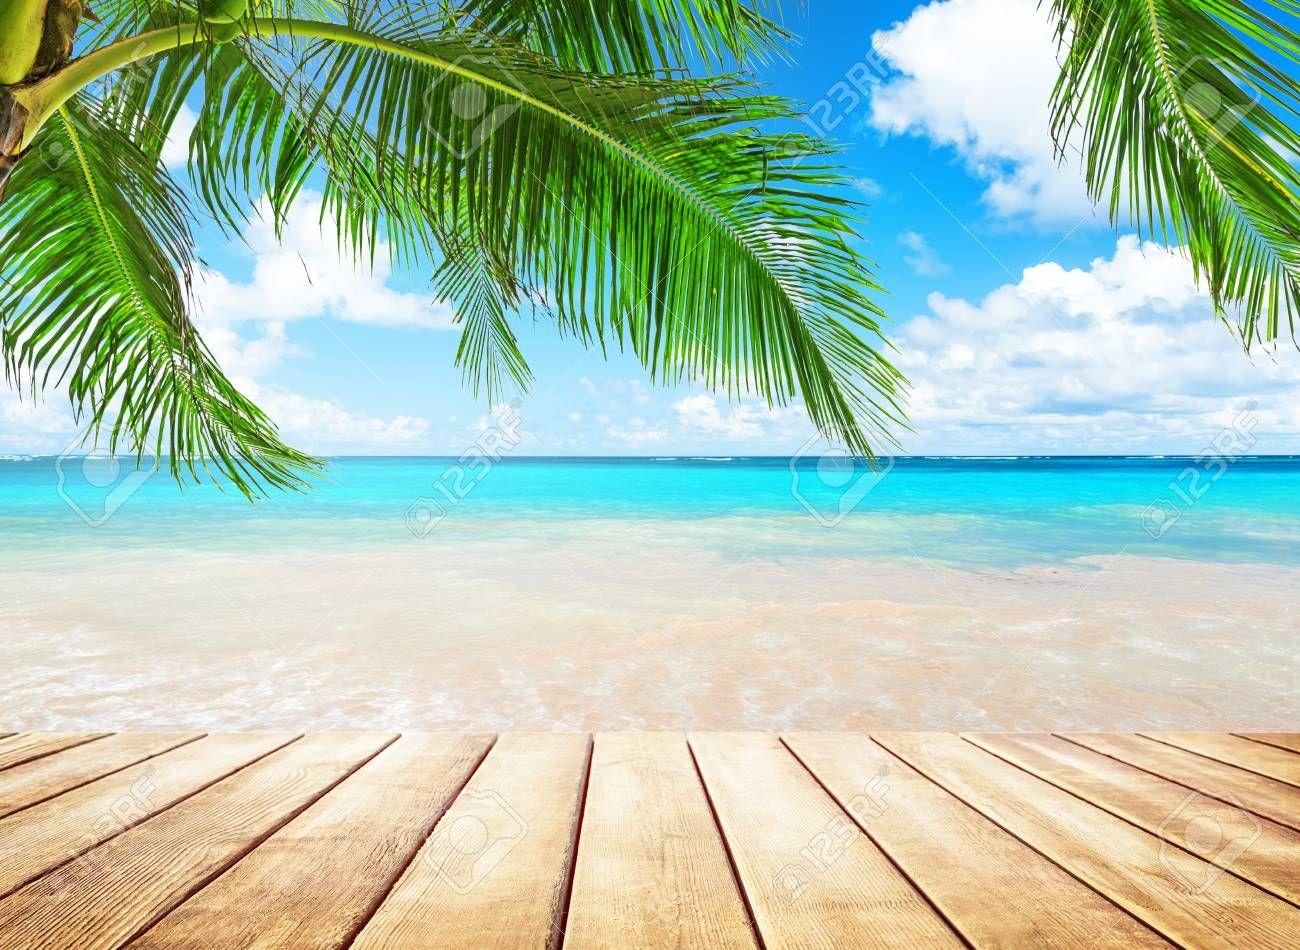 Coconut Tree Wallpapers - Top Free Coconut Tree Backgrounds